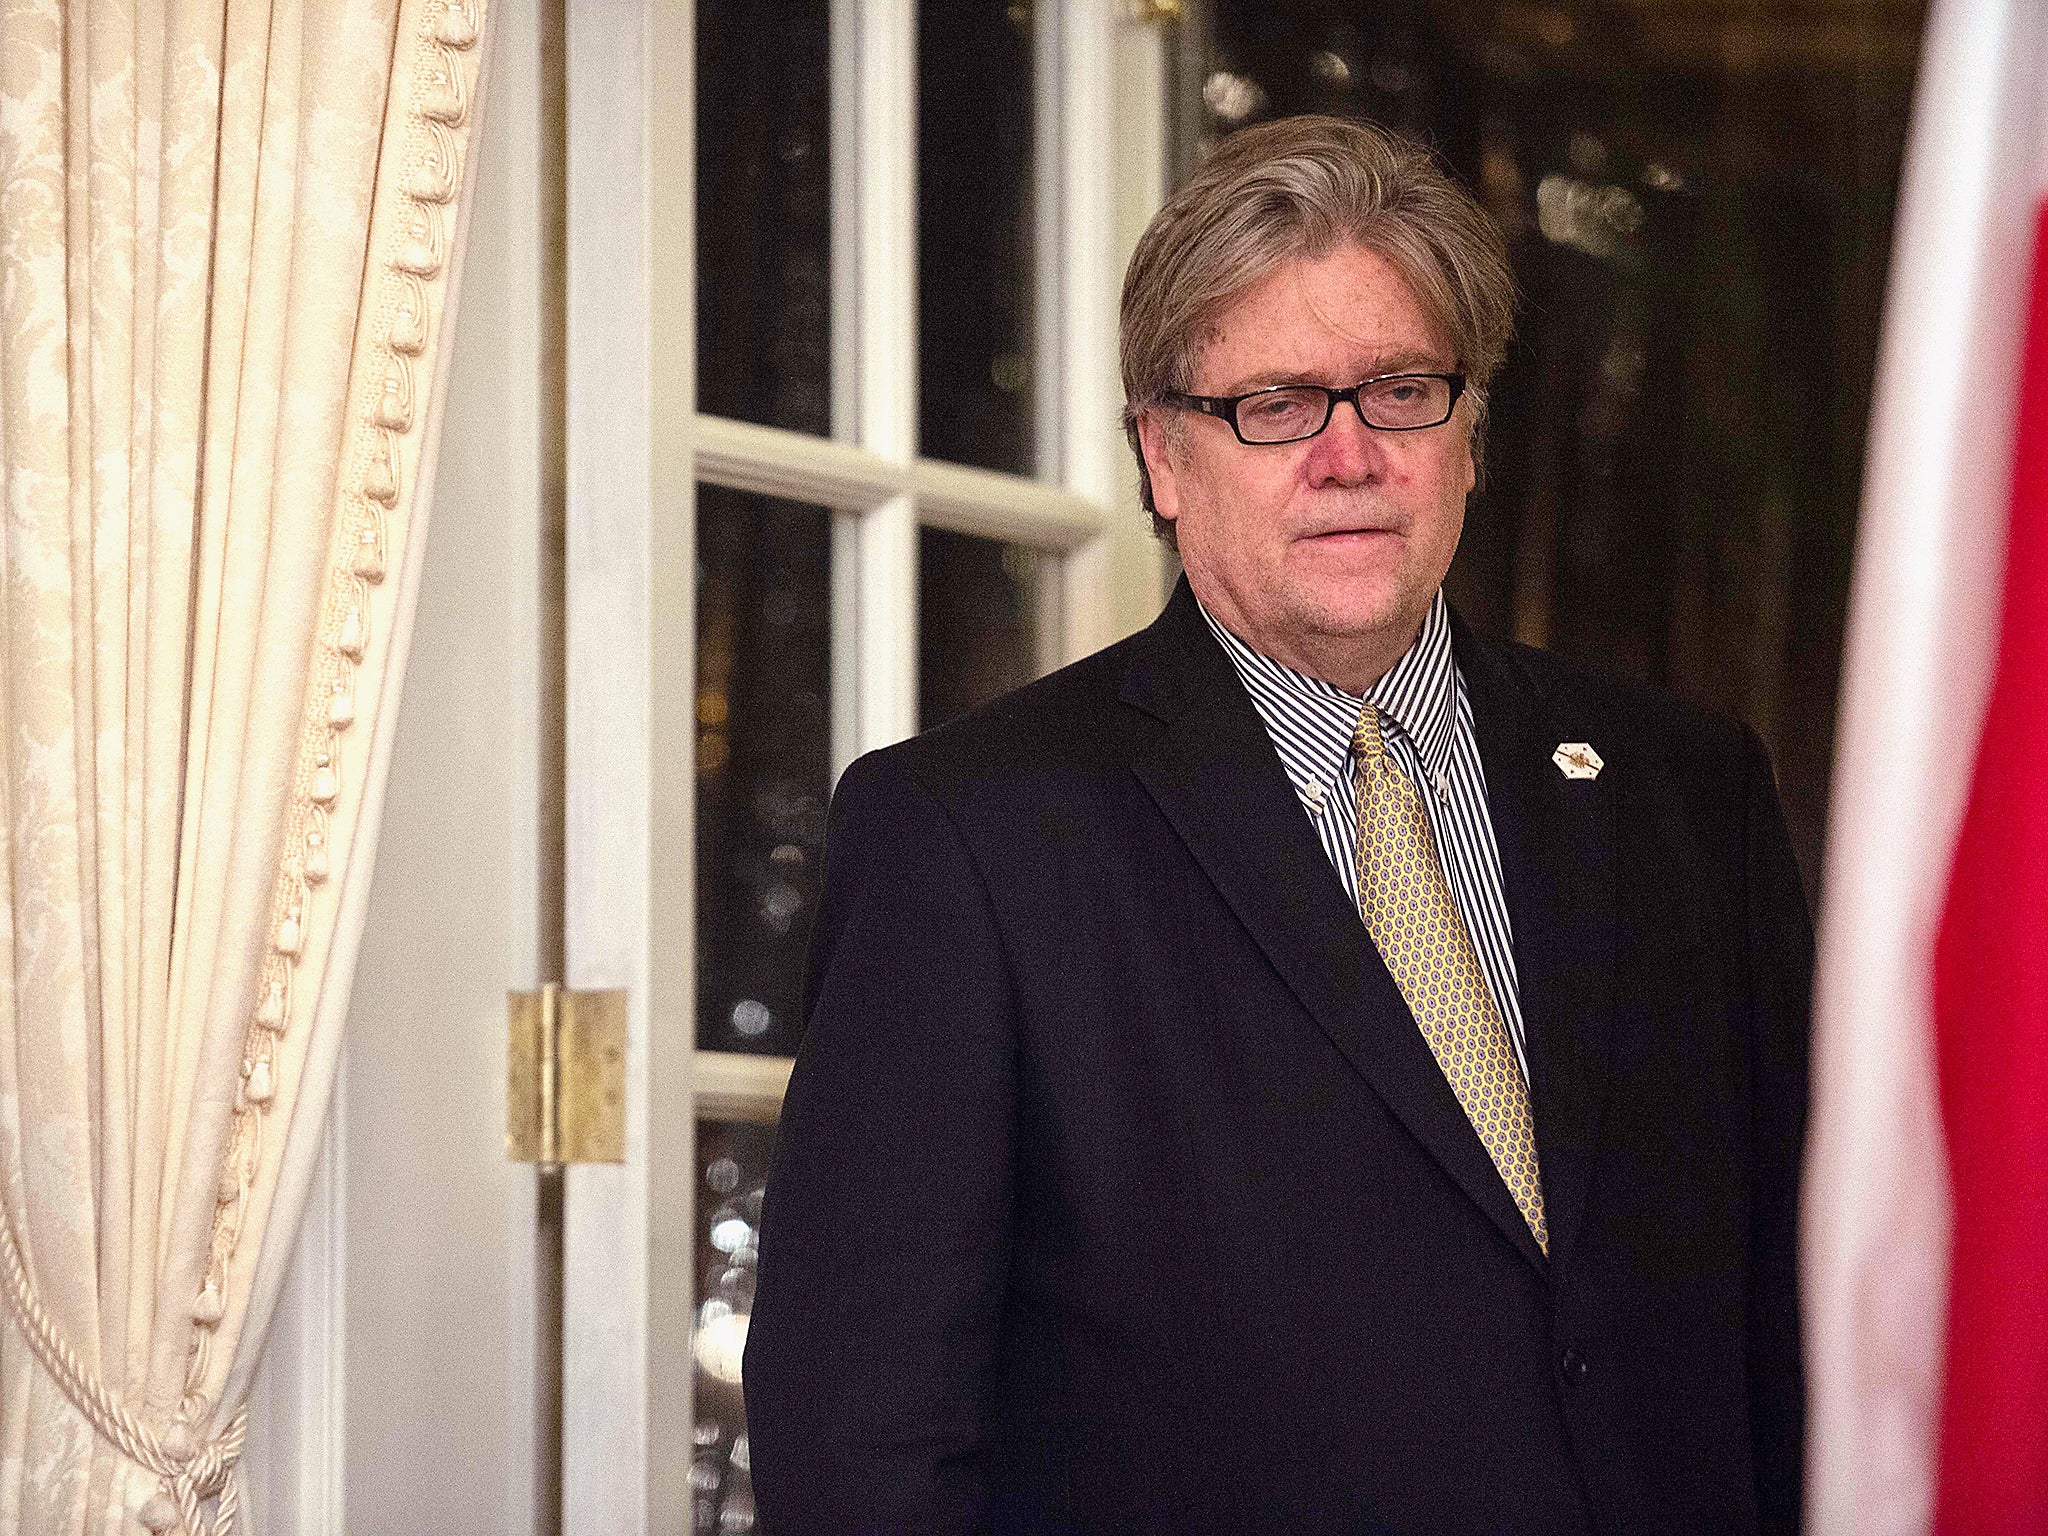 Puppet master? Steve Bannon’s White House role sees him perfectly placed to promote his nationalist beliefs (Getty)